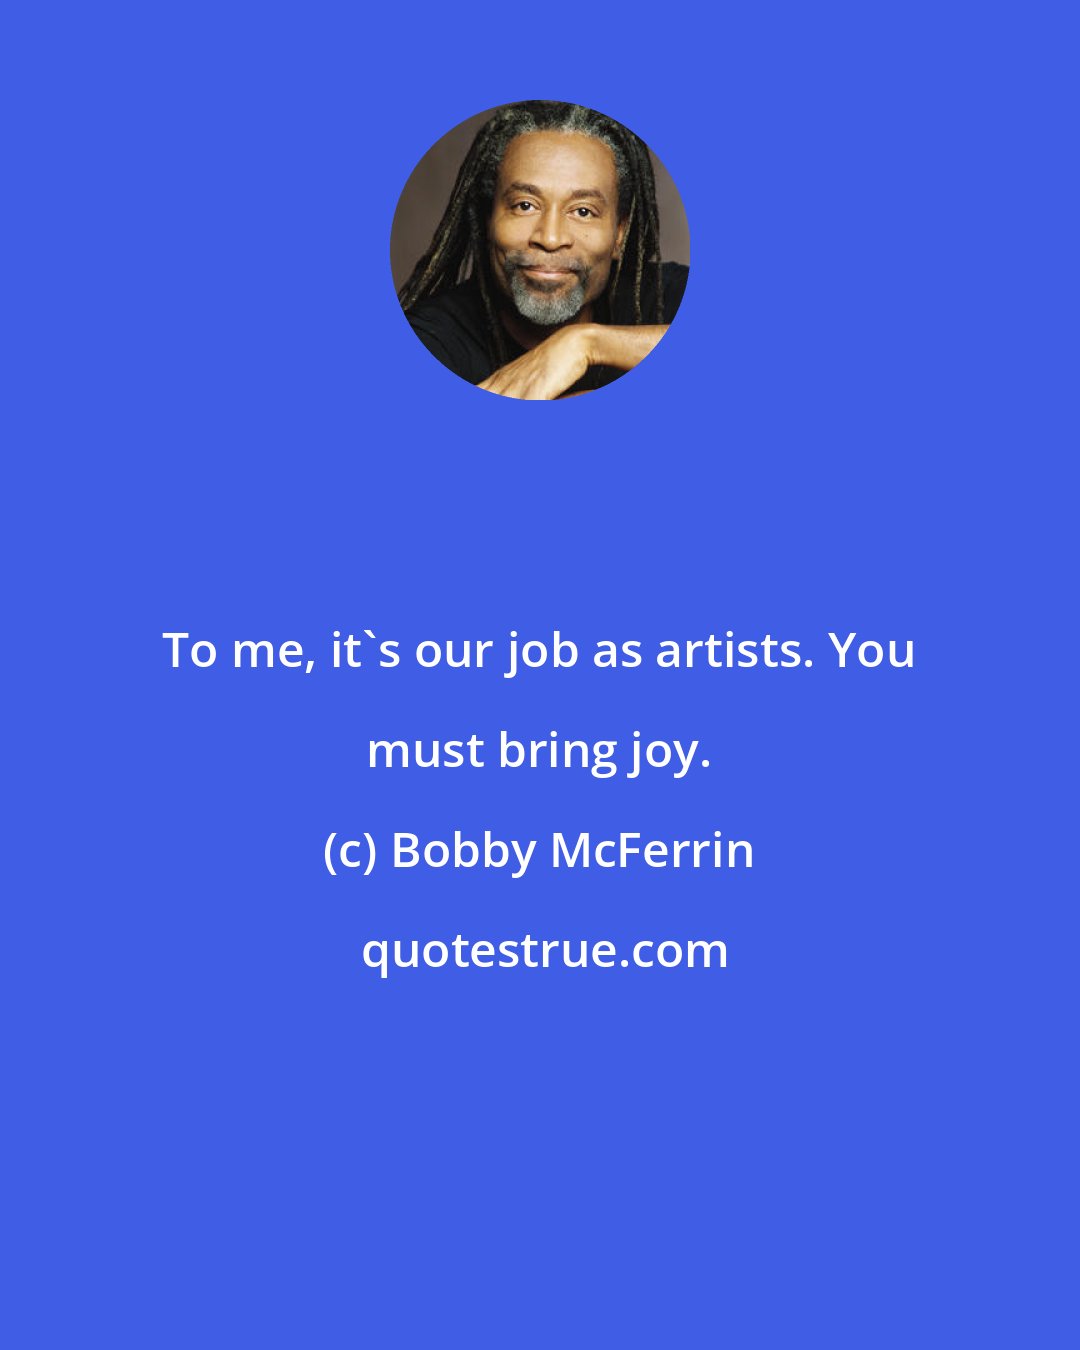 Bobby McFerrin: To me, it's our job as artists. You must bring joy.